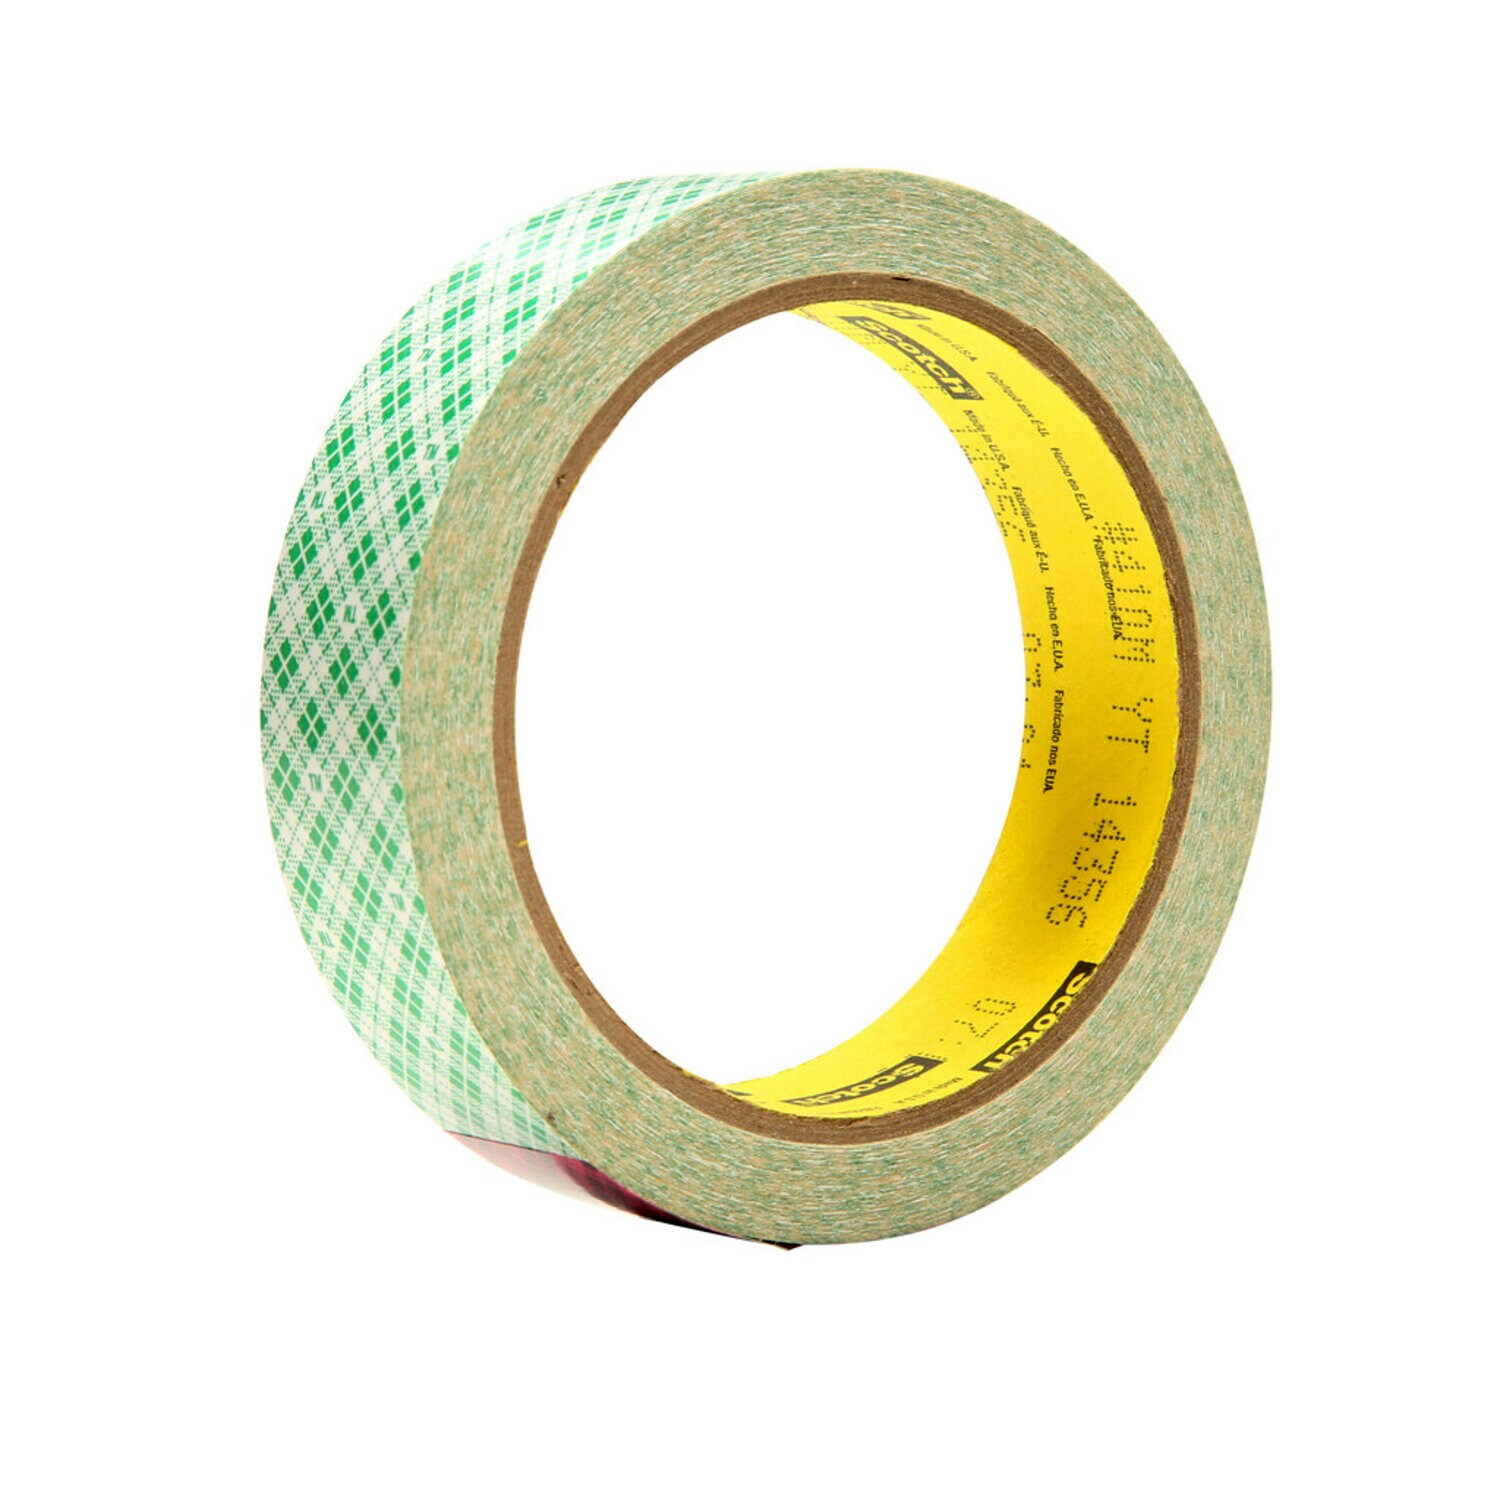 7010410449 - 3M Double Coated Paper Tape 410M, Natural, 3/4 in x 10 yd, 5 mil, 48
rolls per case